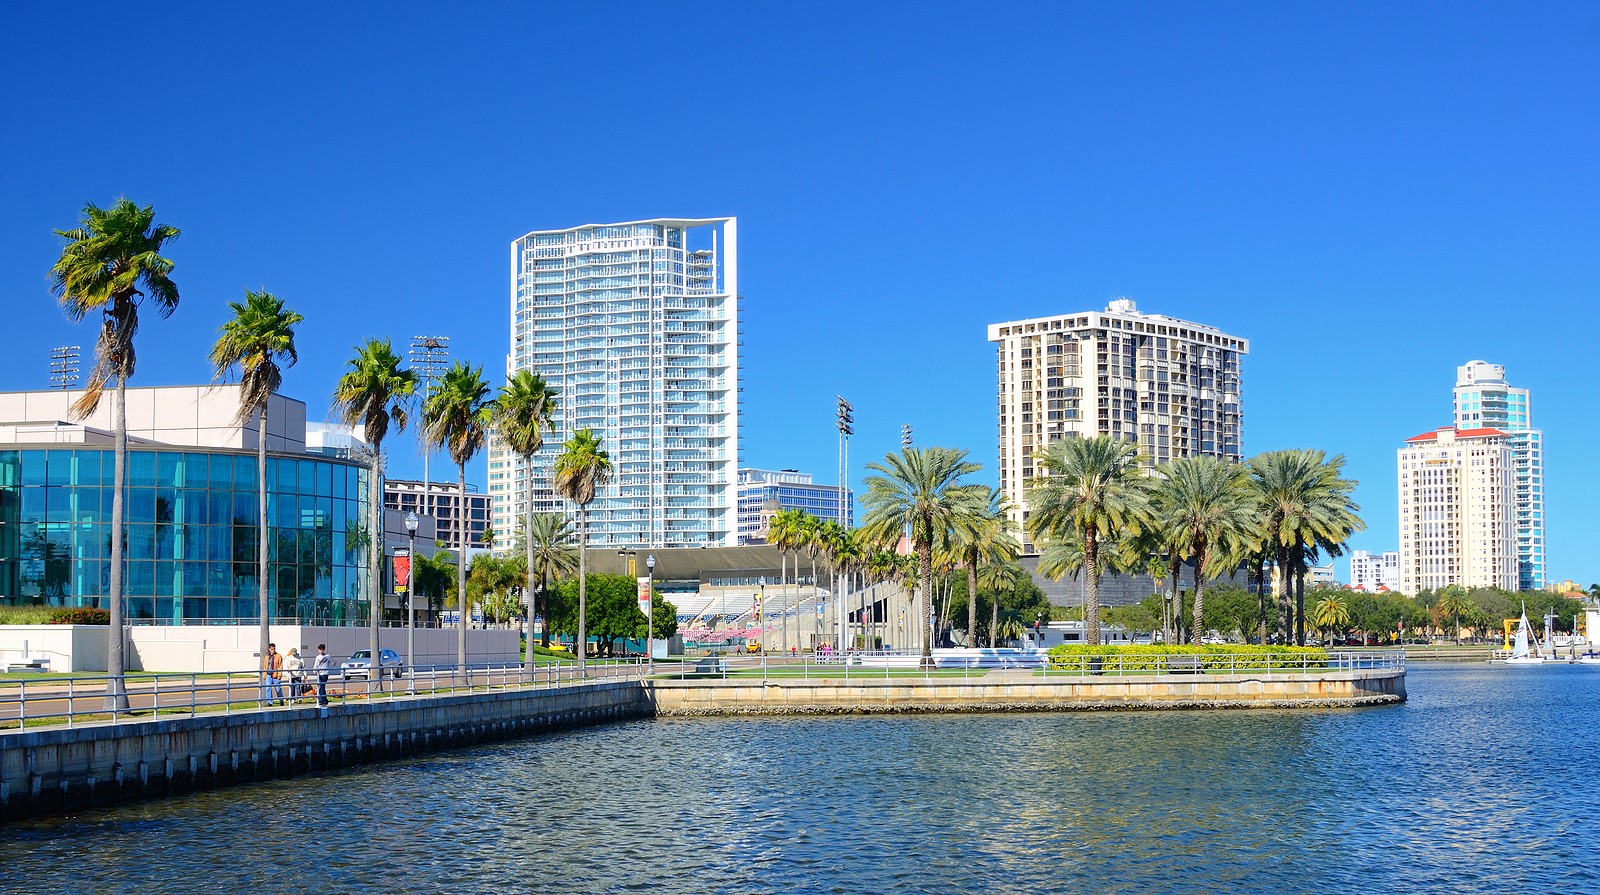 St. Petersburg, Florida skyline during the day.